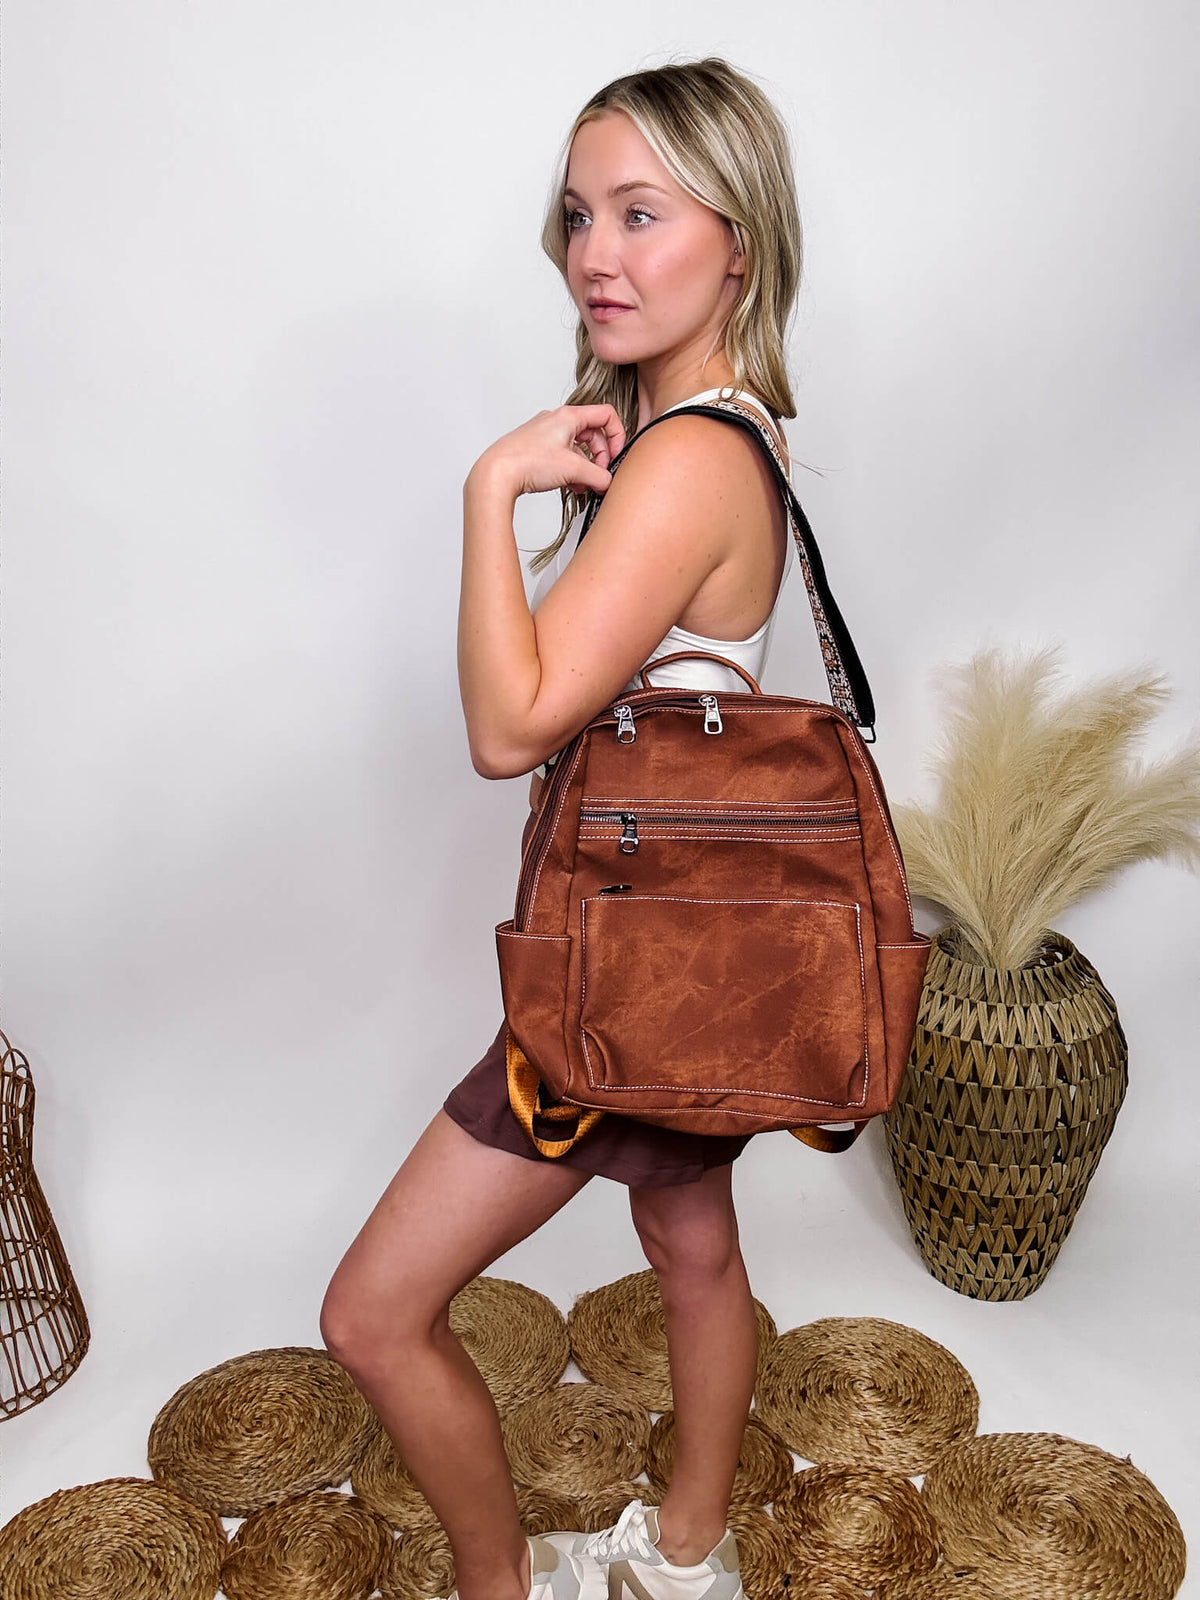 Brown Acid Washed PU Leather Backpack With Boho Strap and Matching Wristlet Full Zipper Closure Main Compartment: 2 Zipper / 2 Stash Pockets & Tablet Pocket Two Front Zipper Pockets Two Side Pockets One Zipper Pocket on Bag Back Removable Guitar Carry Strap (23"-46"L) Adjustable Backpack Straps Wristlet Approximately 7"W X 5"T Bag Body 14"T X11" W X 4.5D Material: Canvas Textured PU Leather